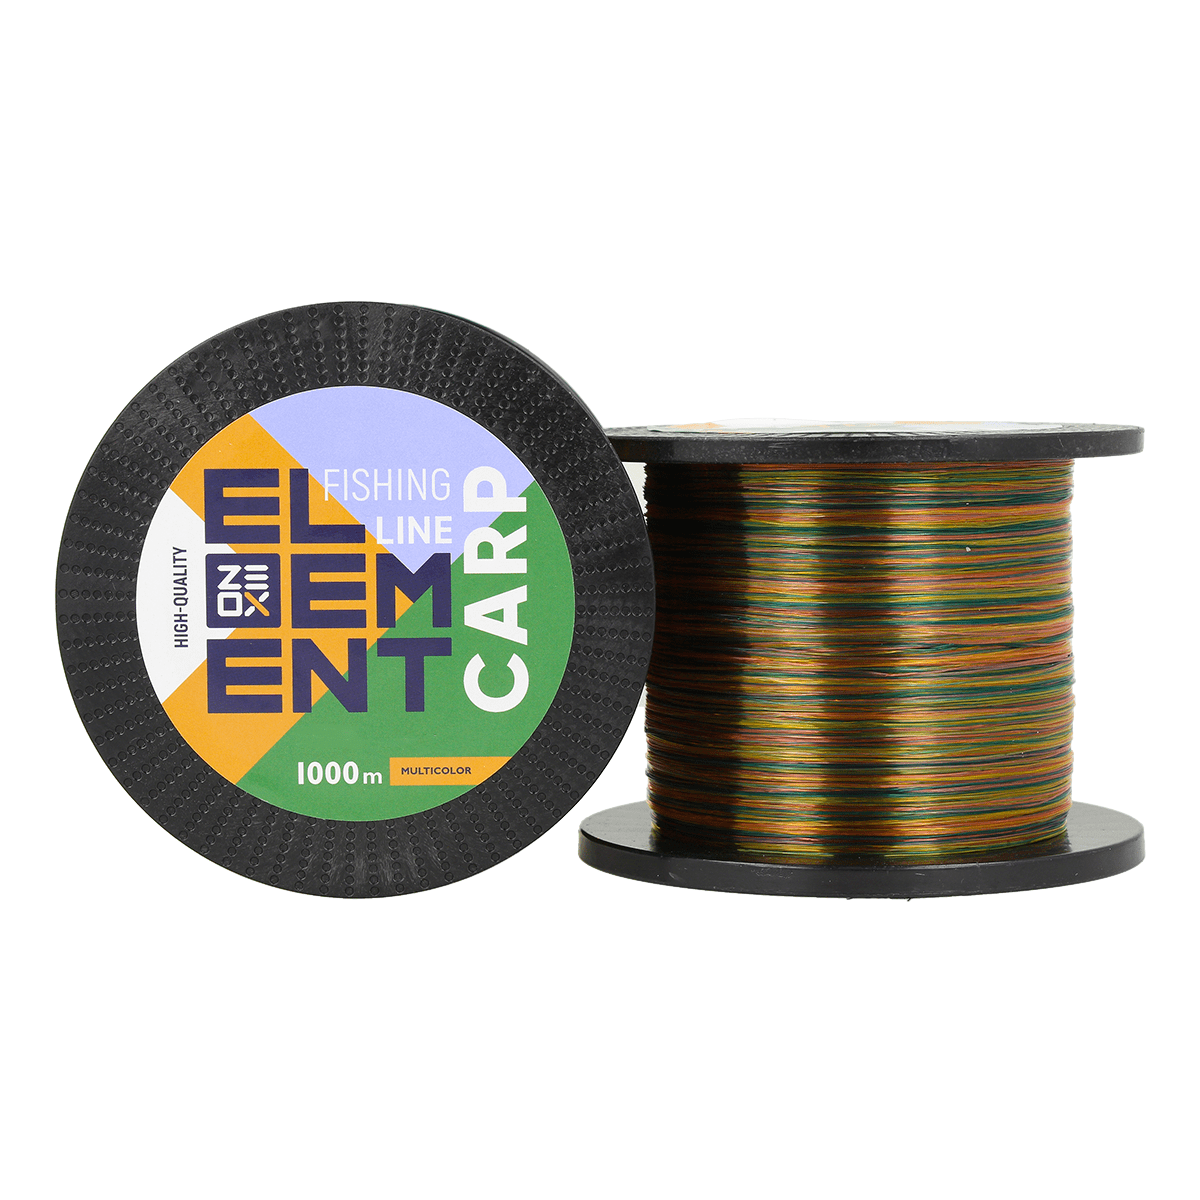 Shop Fishing Nylon Lines at Golden Catch